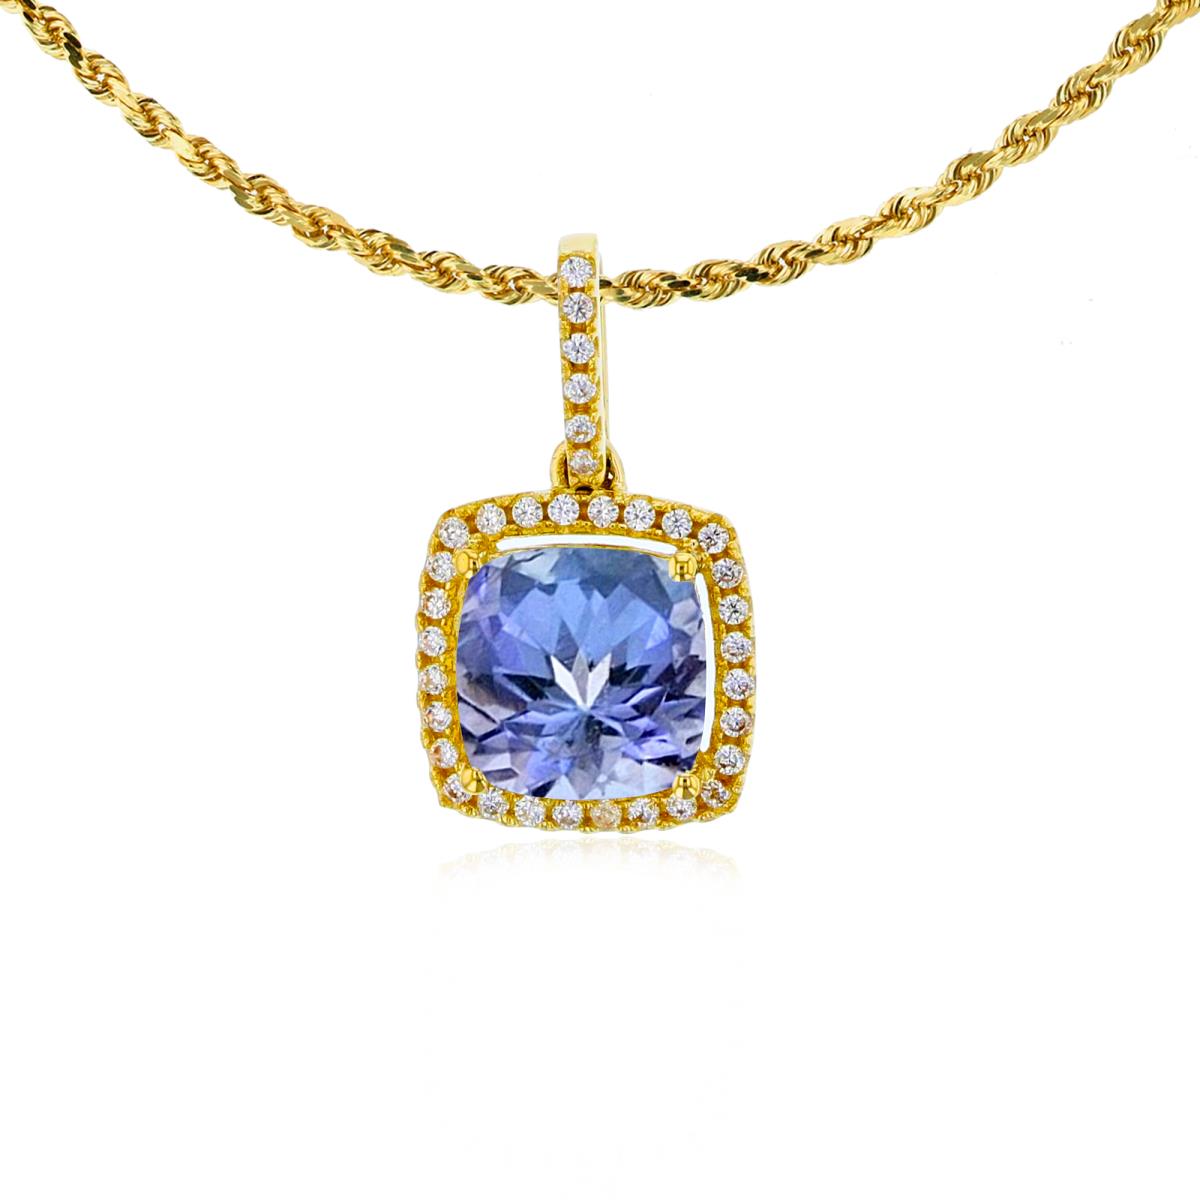 10K Yellow Gold 7mm Cushion Tanzanite & 0.14 CTTW Rnd Diamond Halo 18" Rope Chain Necklace